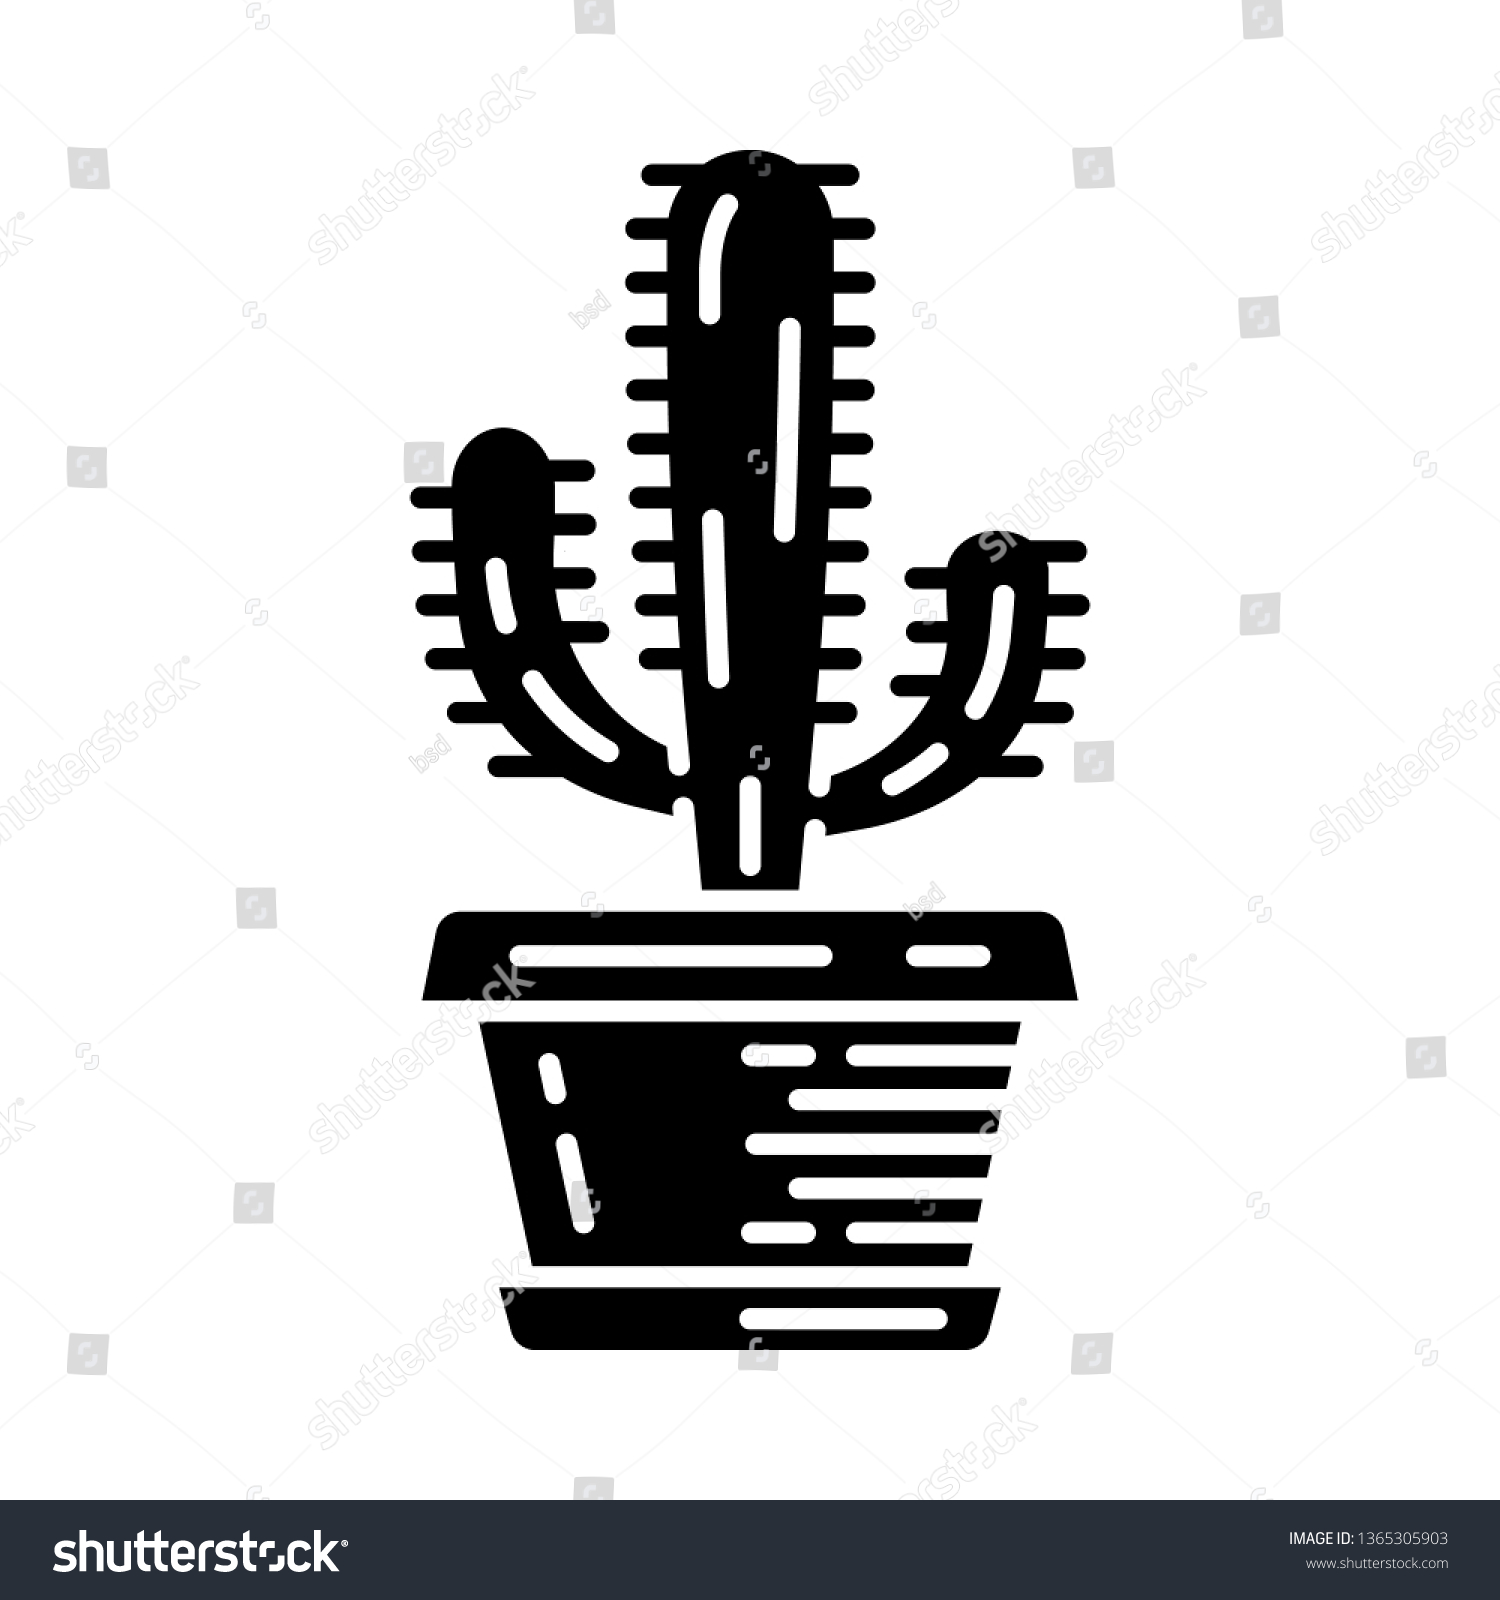 SVG of Mexican giant cactus in pot glyph icon. Cardon. Elephant cactus. House and garden plant. Silhouette symbol. Negative space. Vector isolated illustration svg